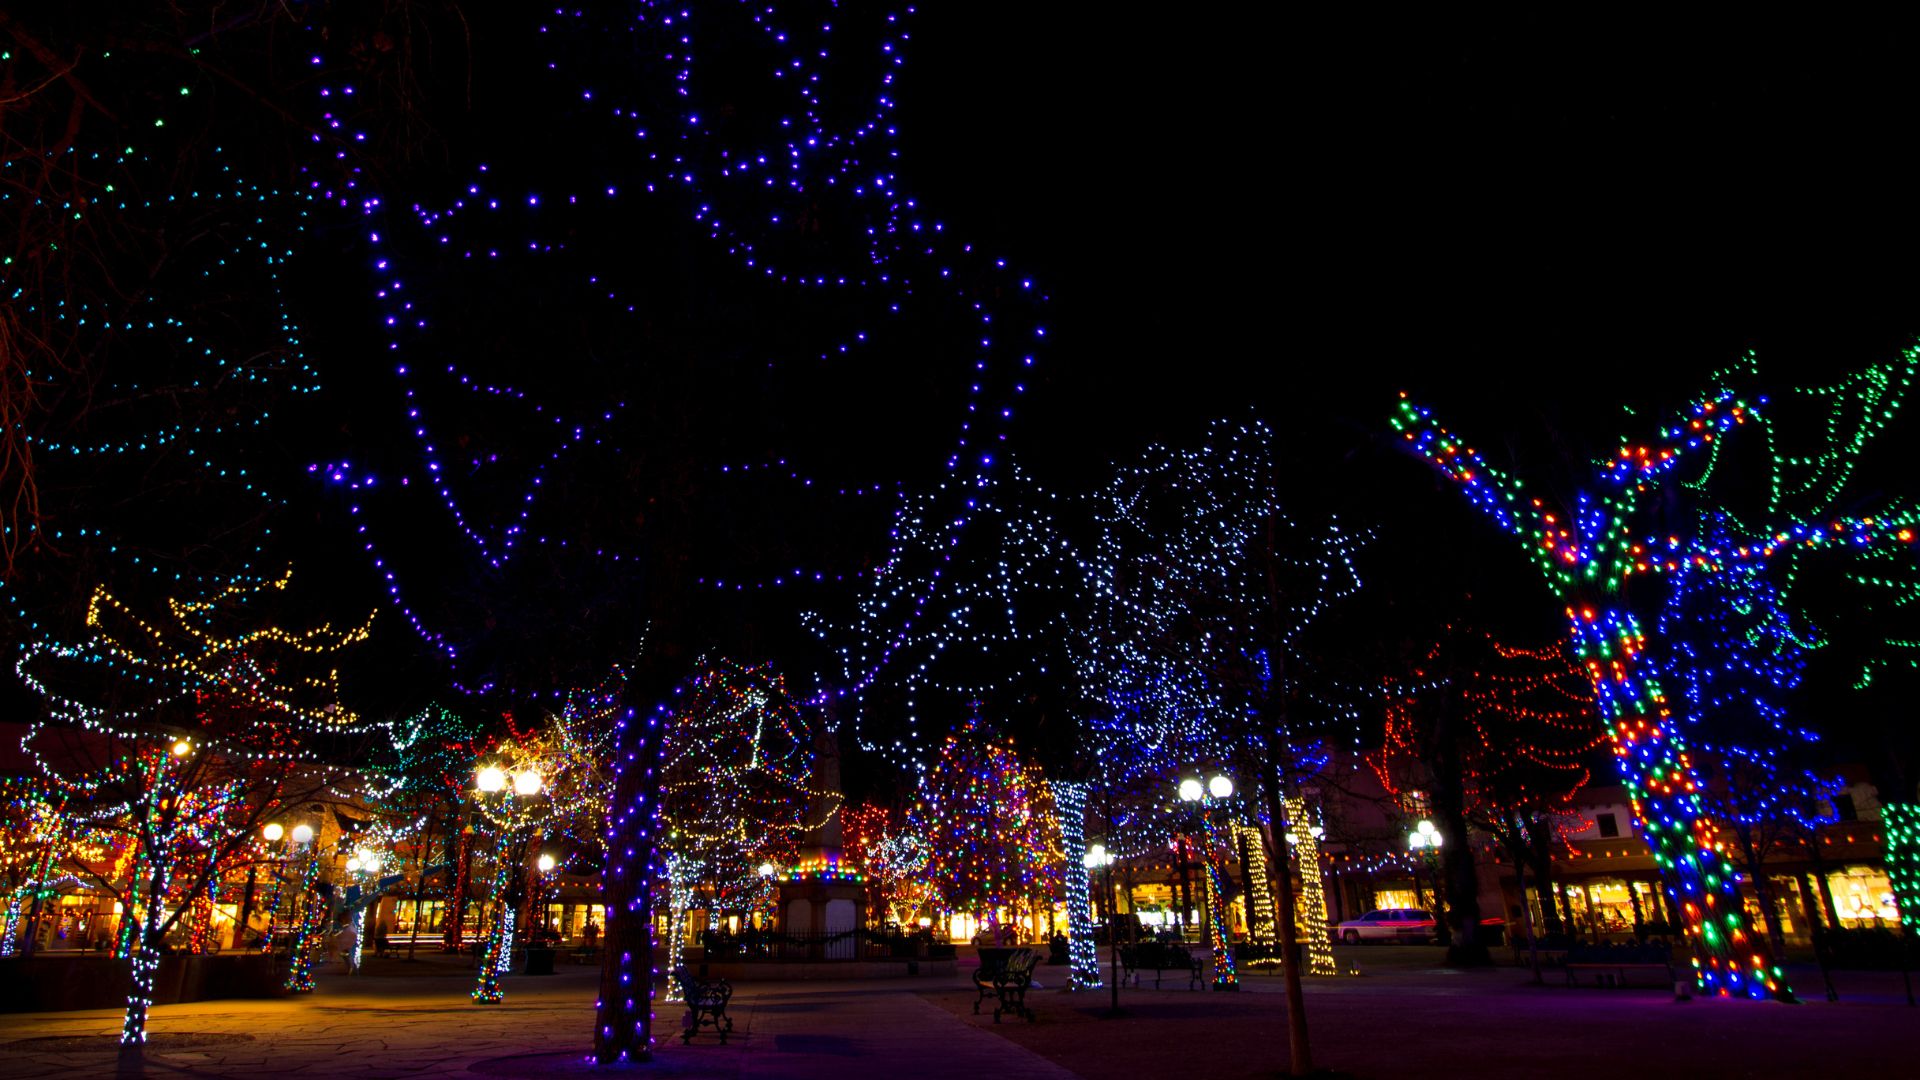 Santa Fe Plaza lit up at night with thousands of different colored twinkle lights.